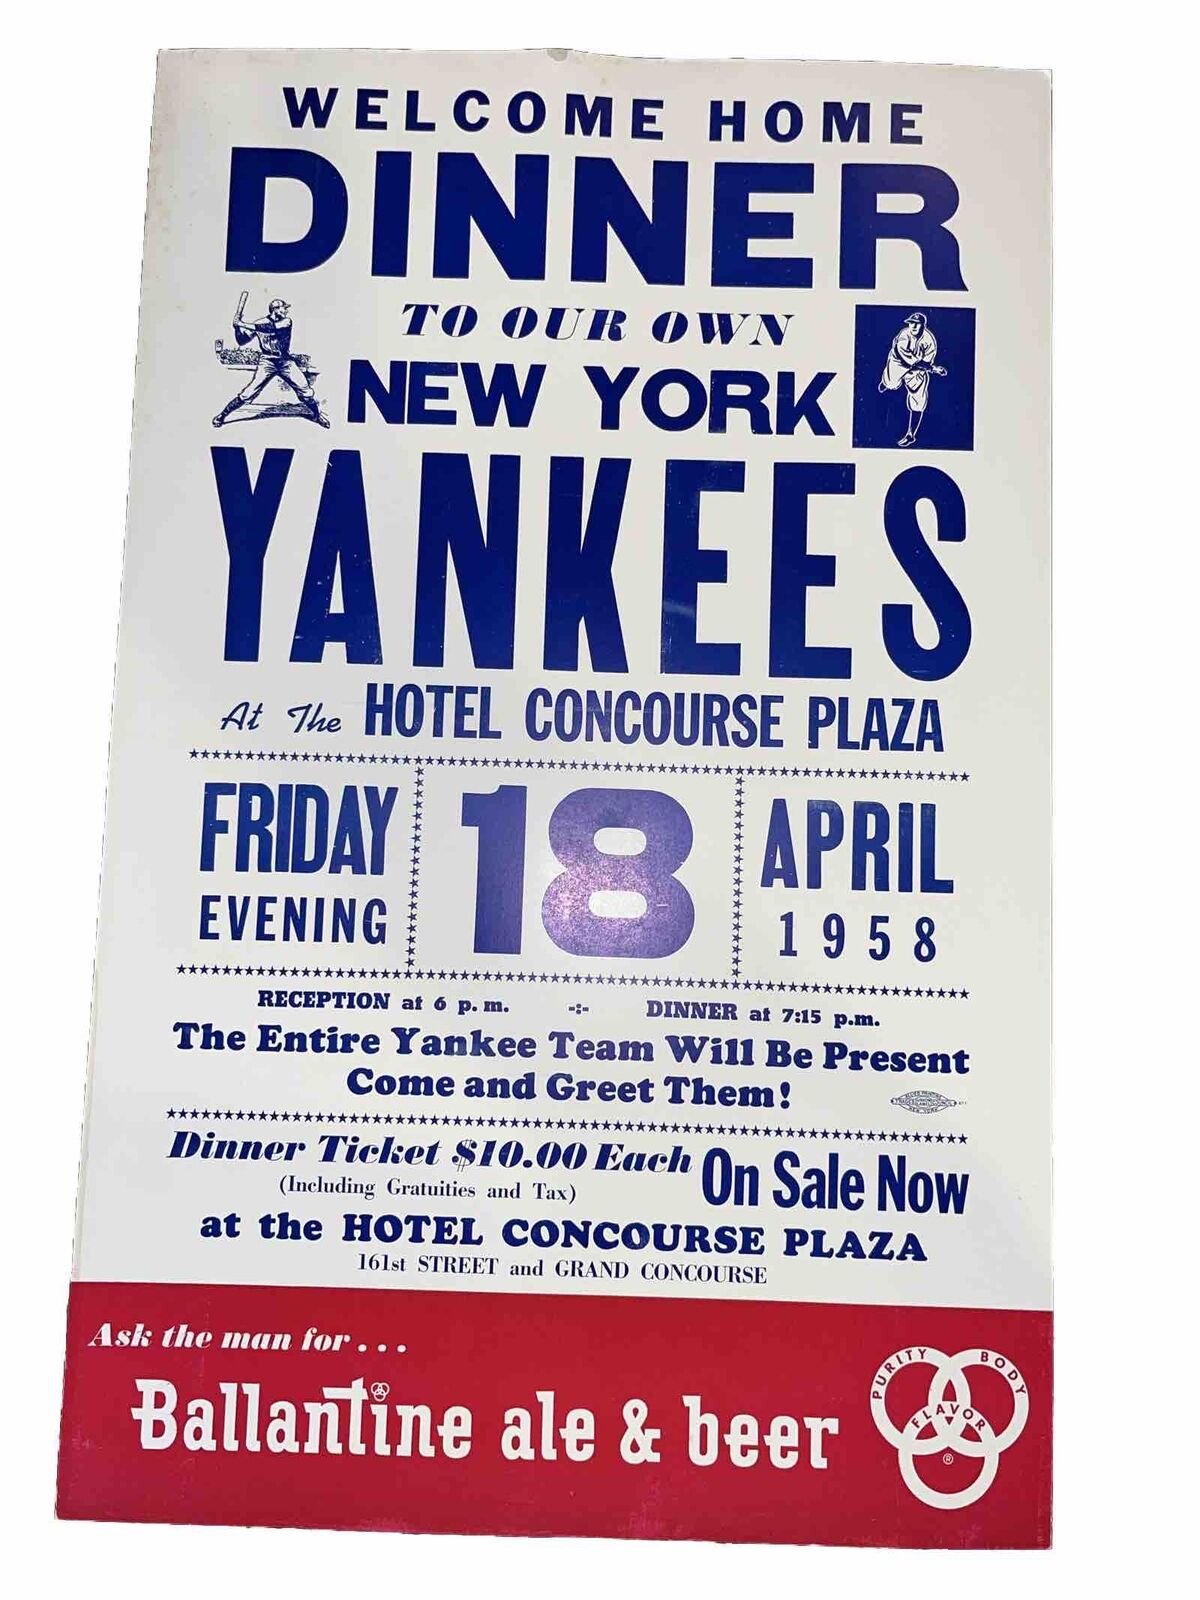 Welcome home dinner New York Yankees vintage Friday evening 18th April 1958